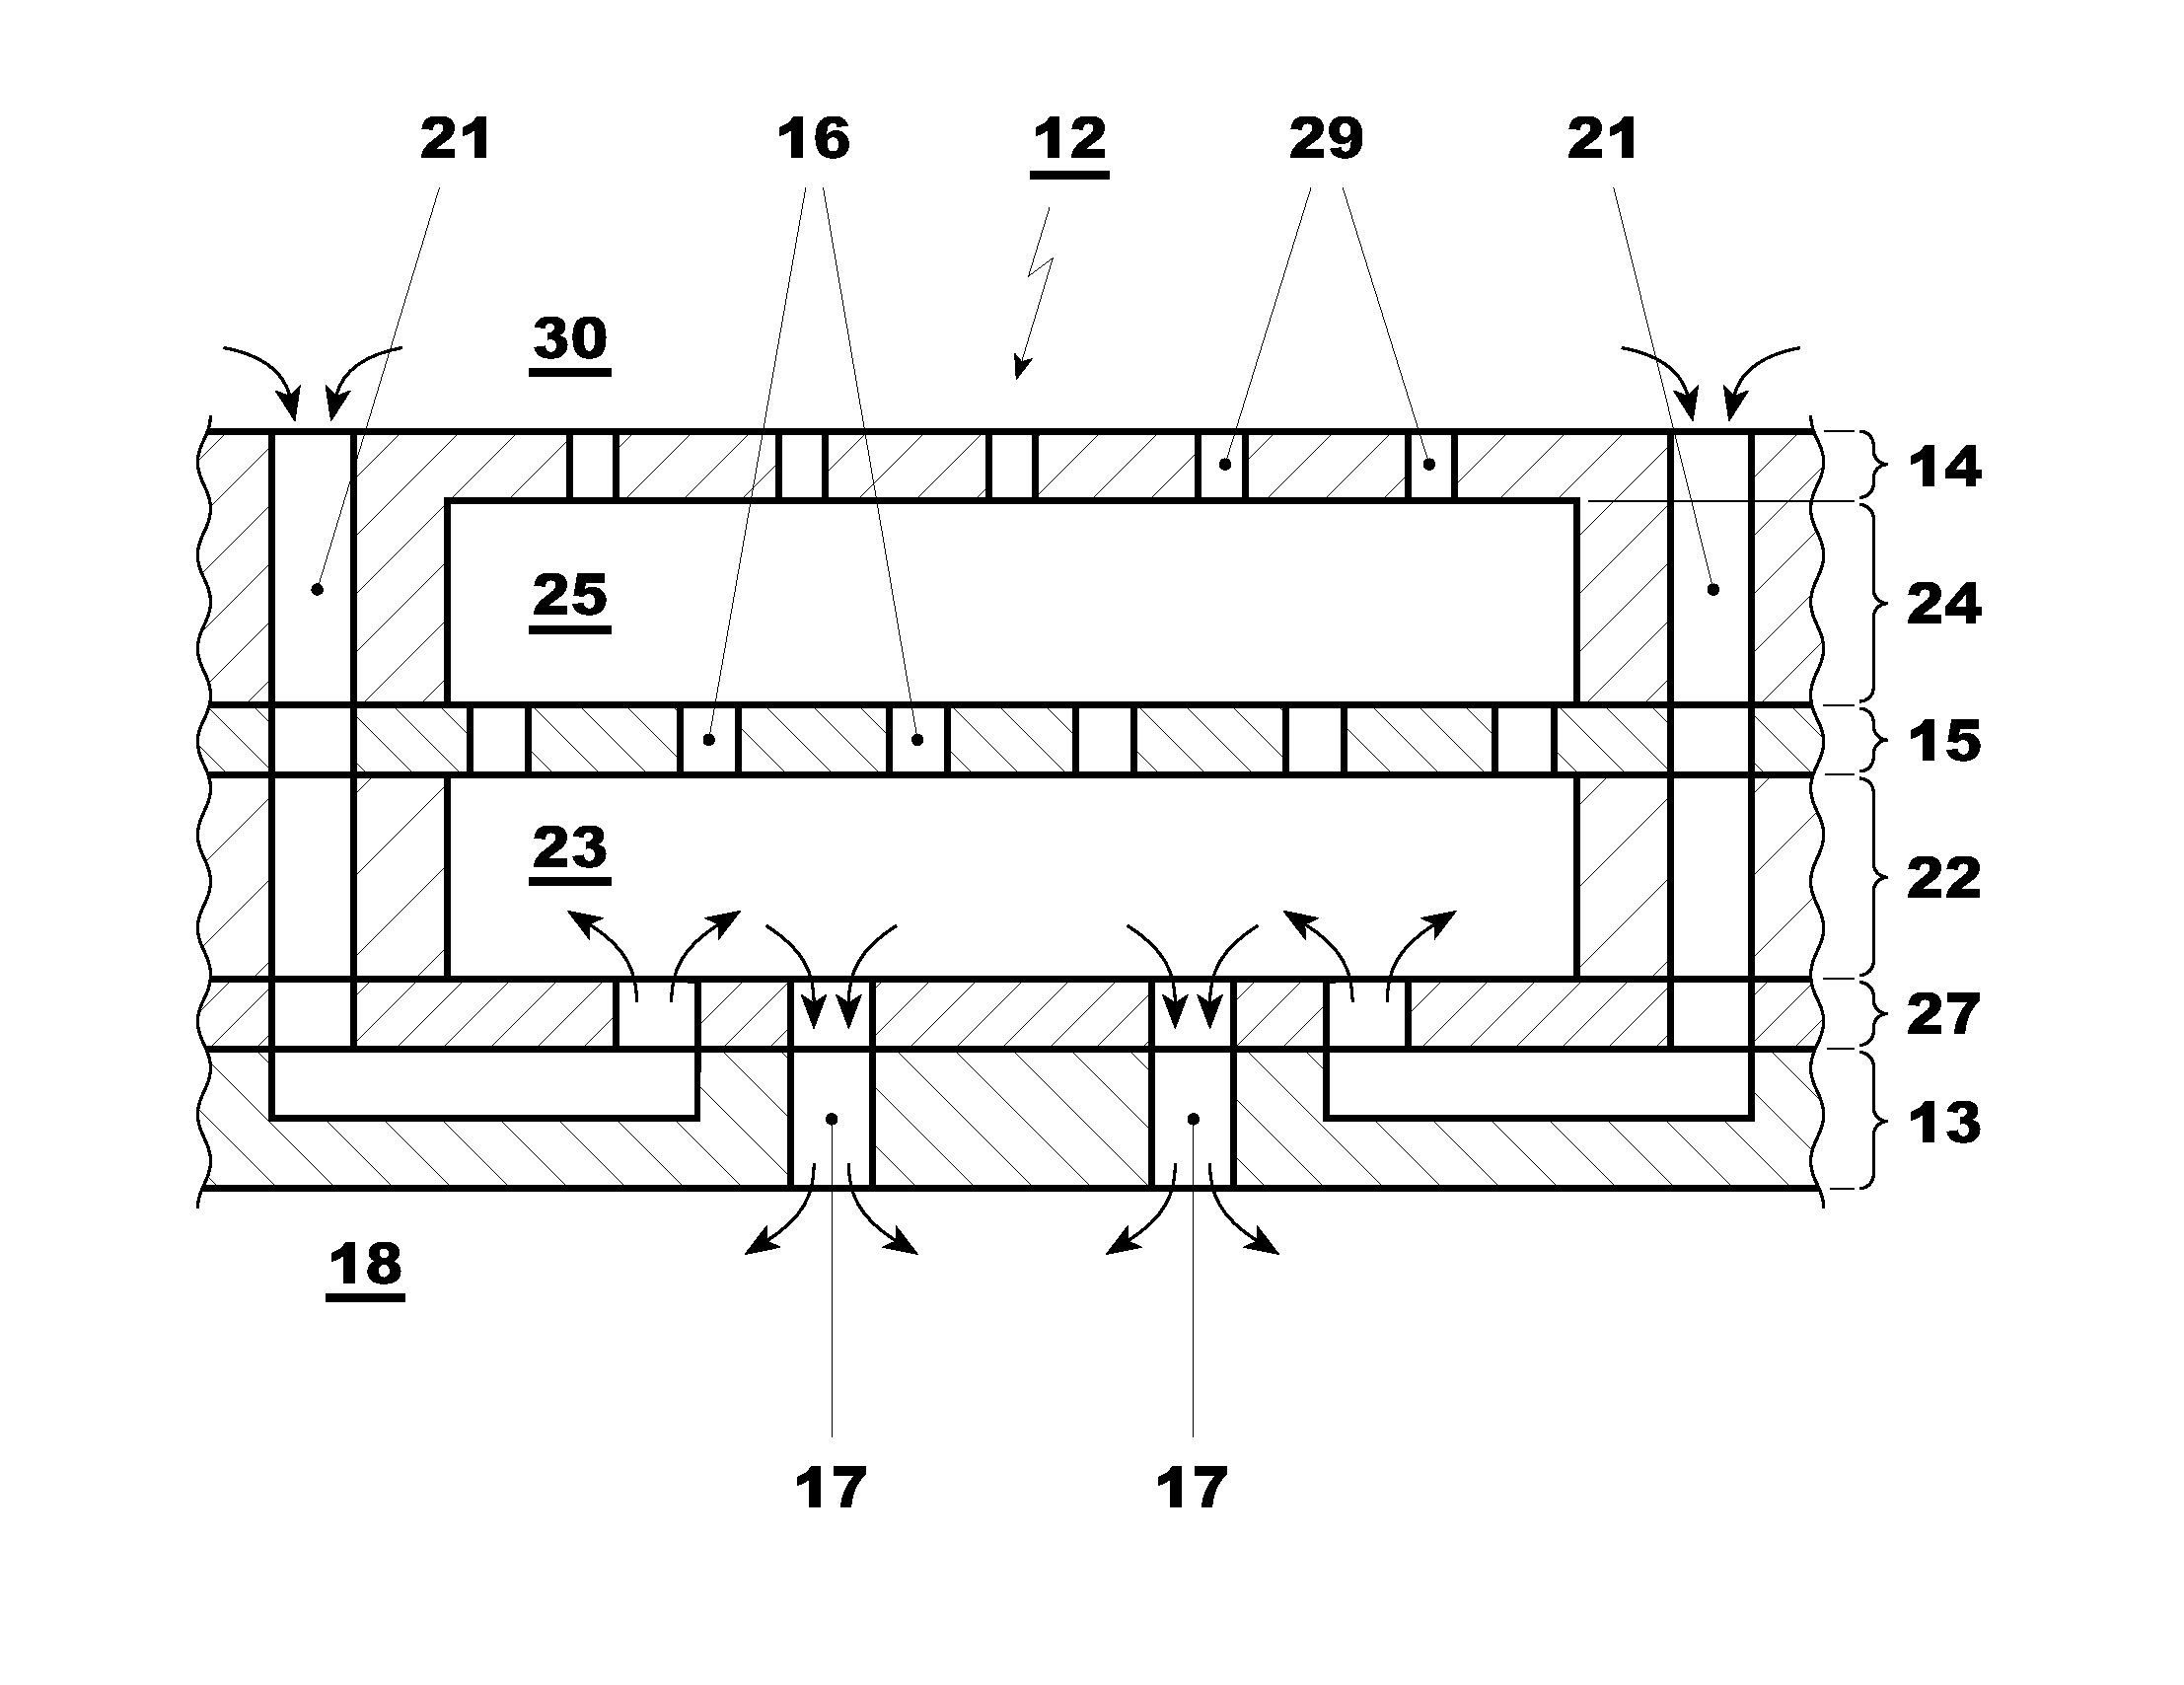 Combustion device for a gas turbine